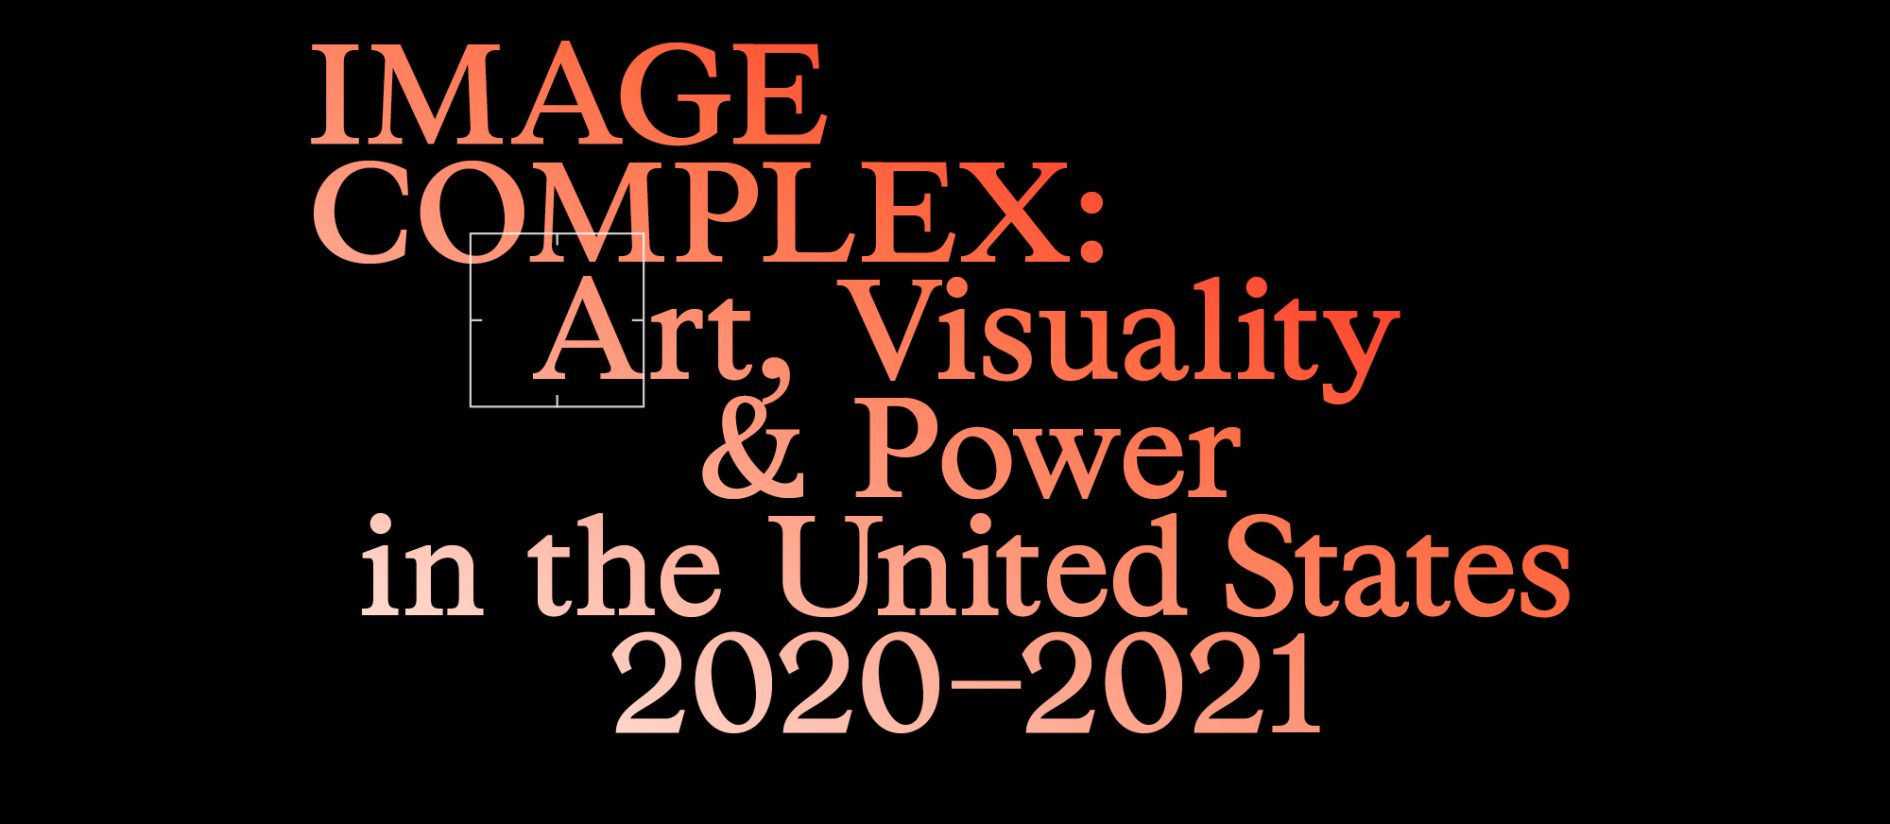 Image Complex: Art, Visuality & Power in the United States 2020-2021